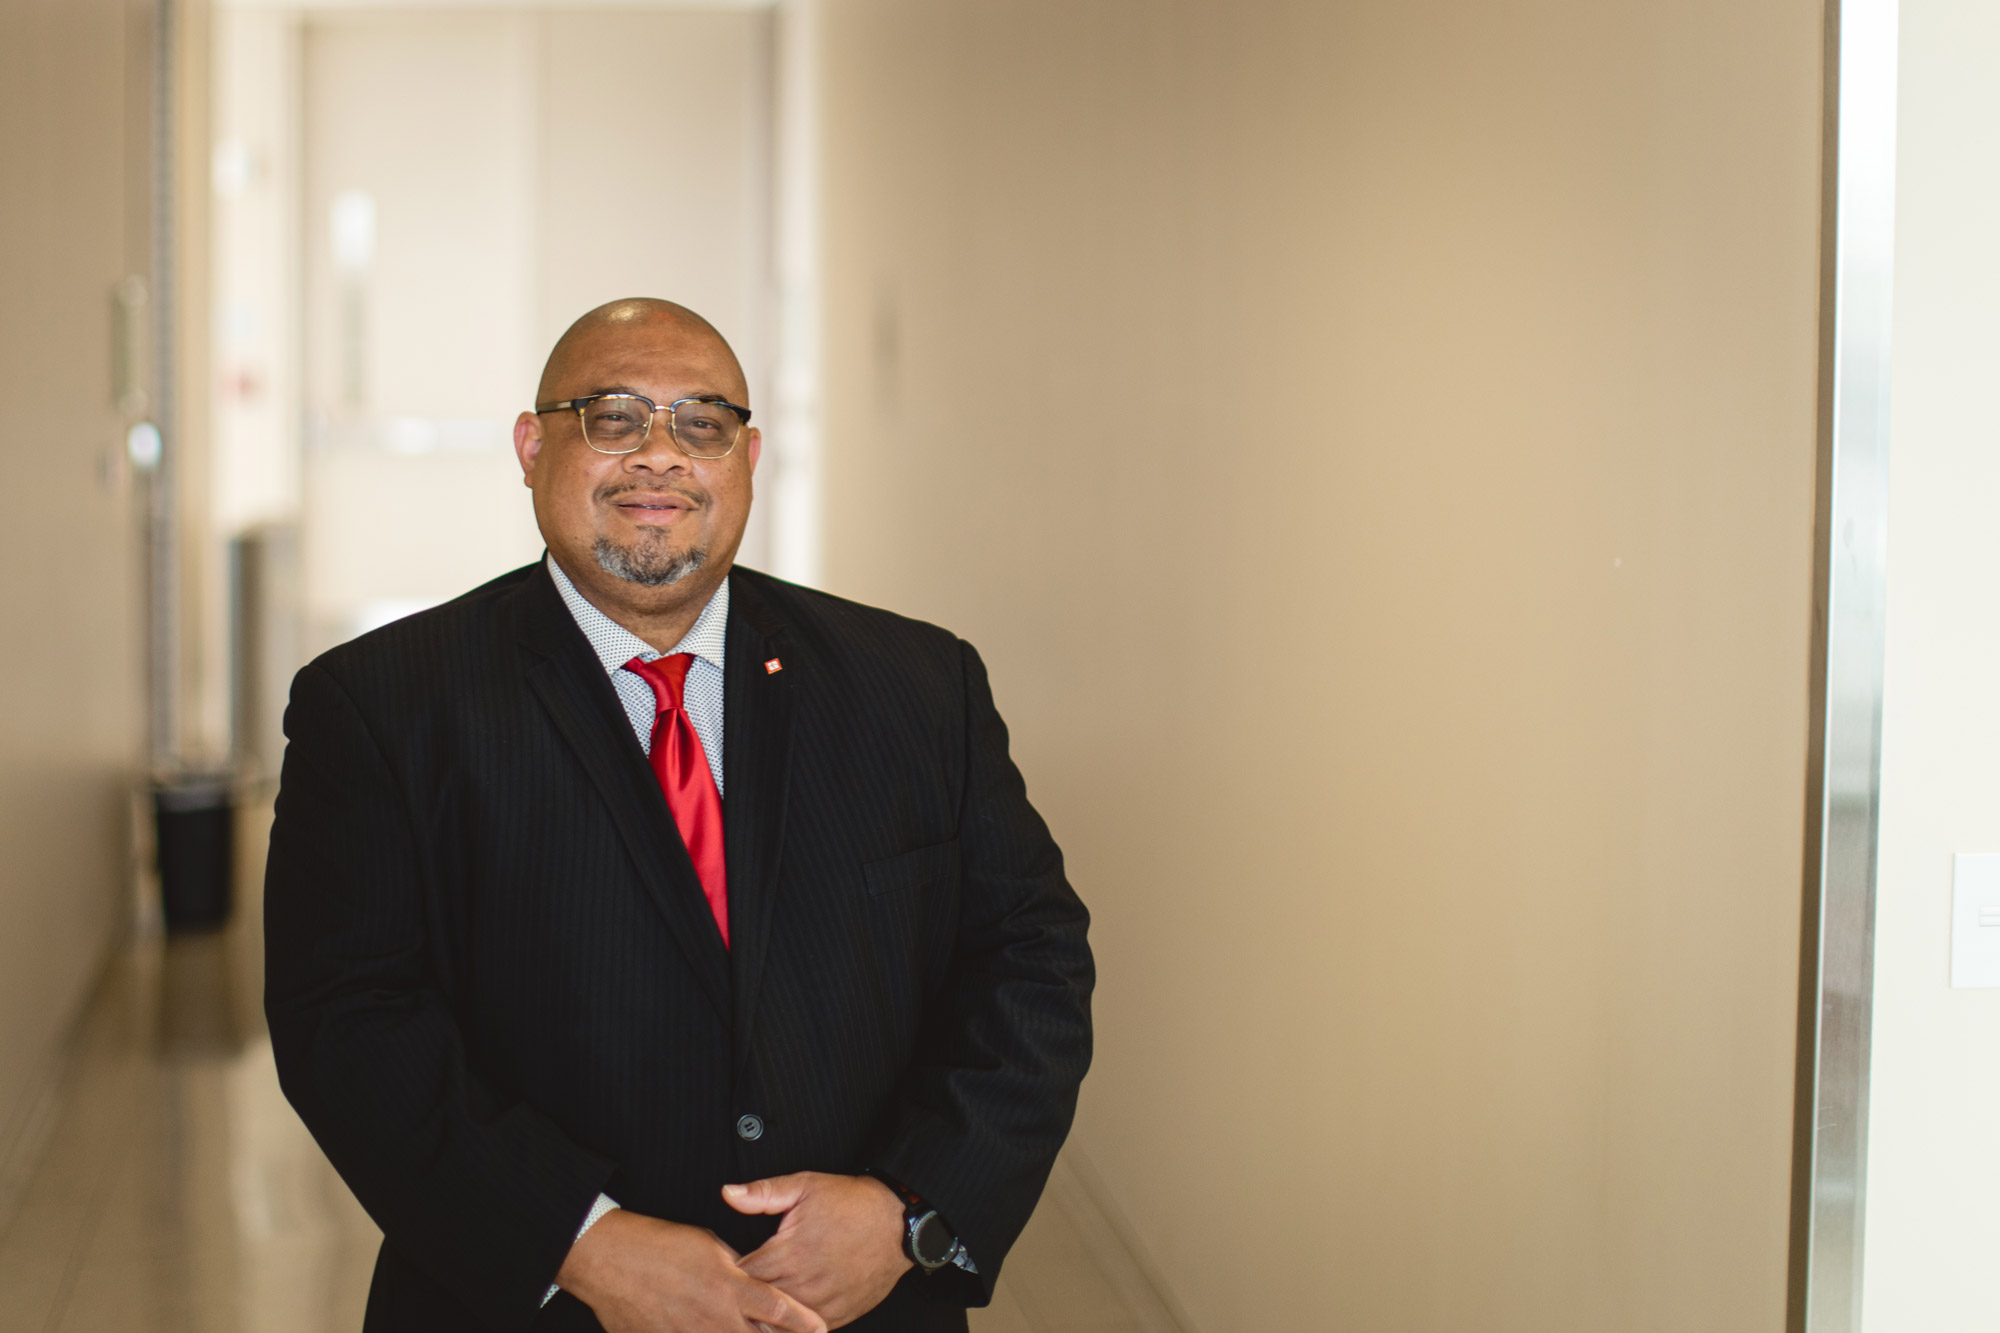 Dr. Kevin Harris named interim and inaugural senior associate dean for Diversity, Equity and Inclusion for the School of Medicine